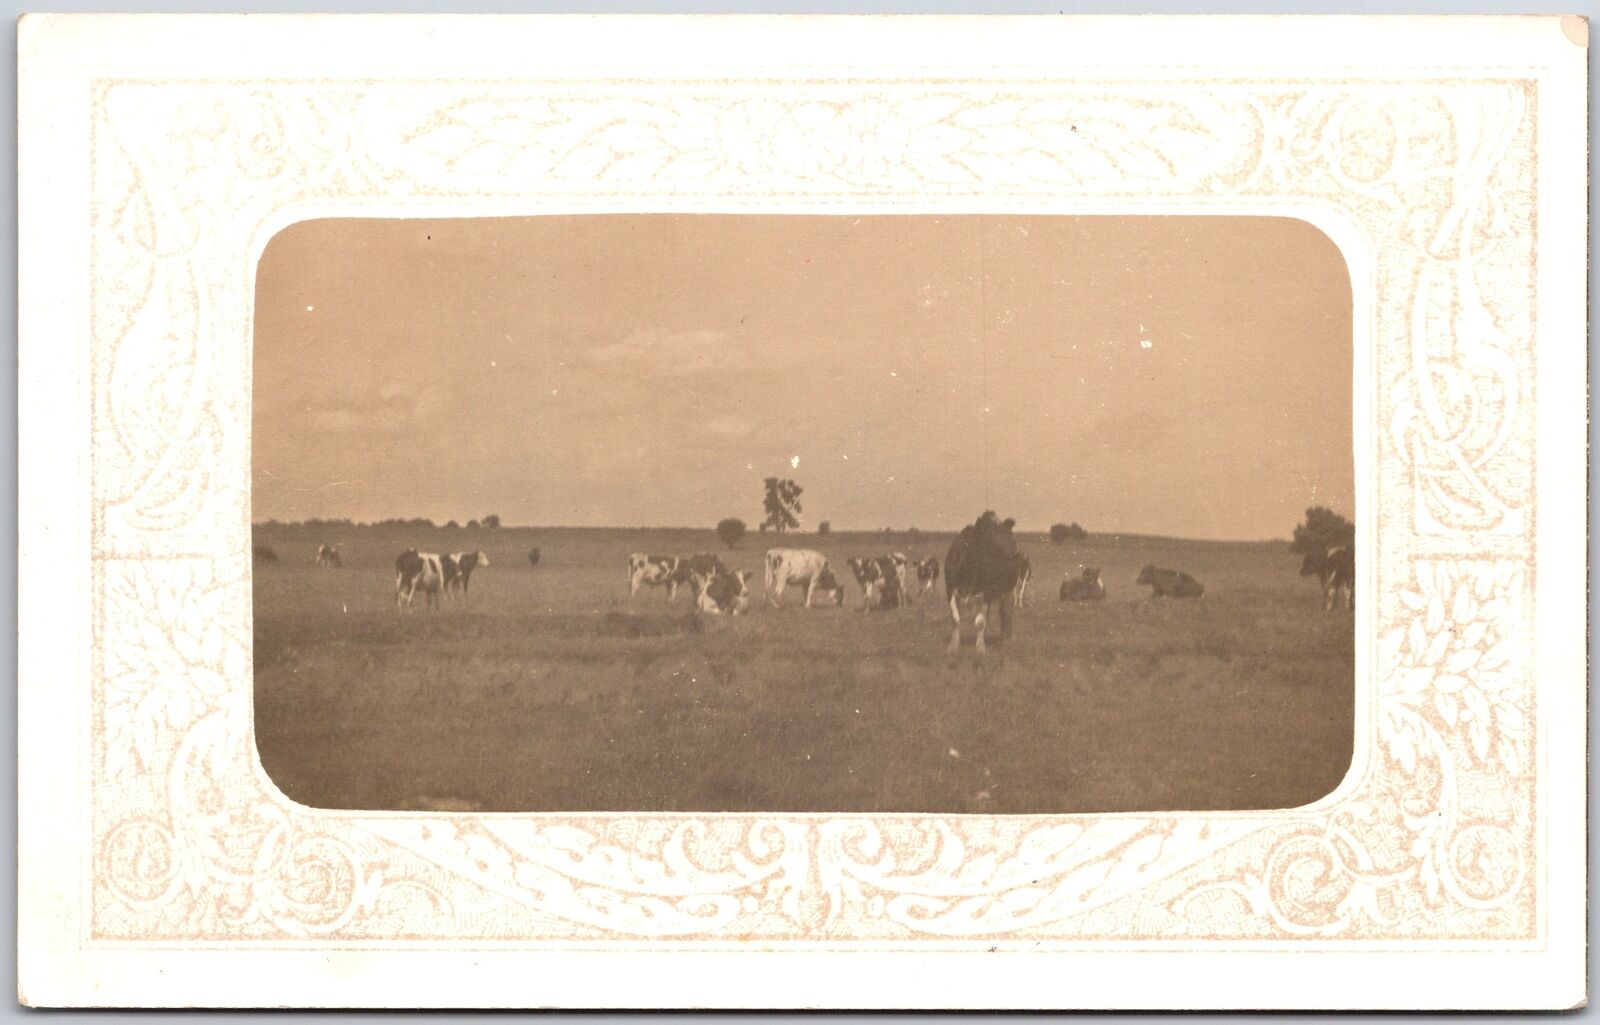 Cattles In The Greener Pastures Antique Postcard